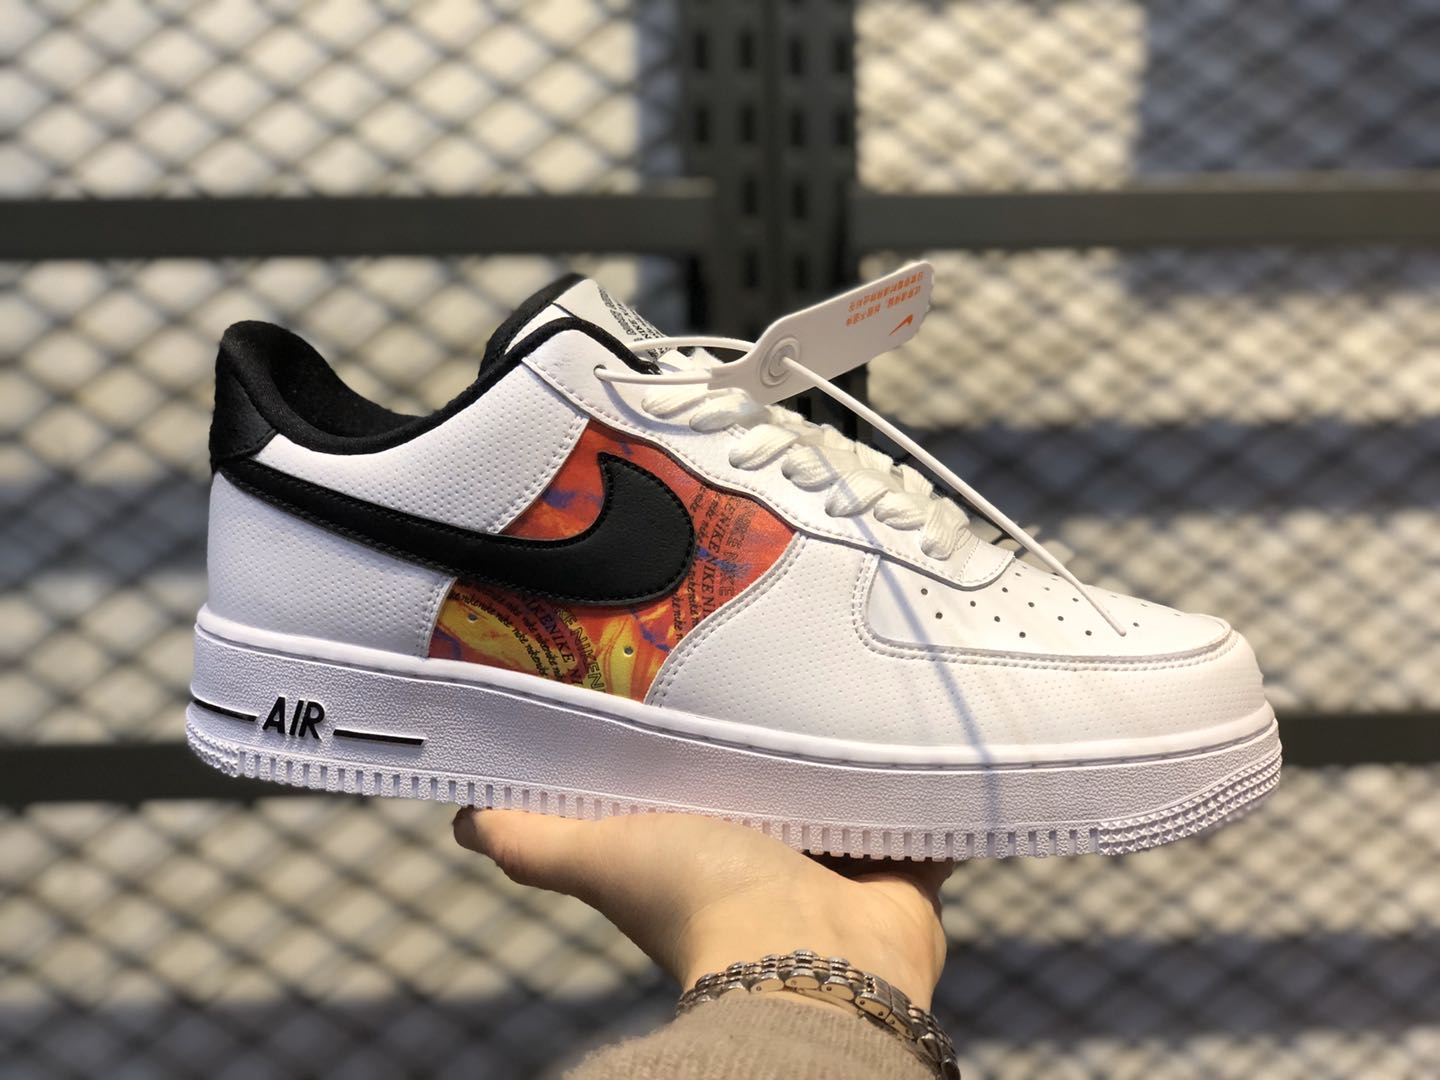 Nike Men's Air Force 1 '07 LV8 Shoes 